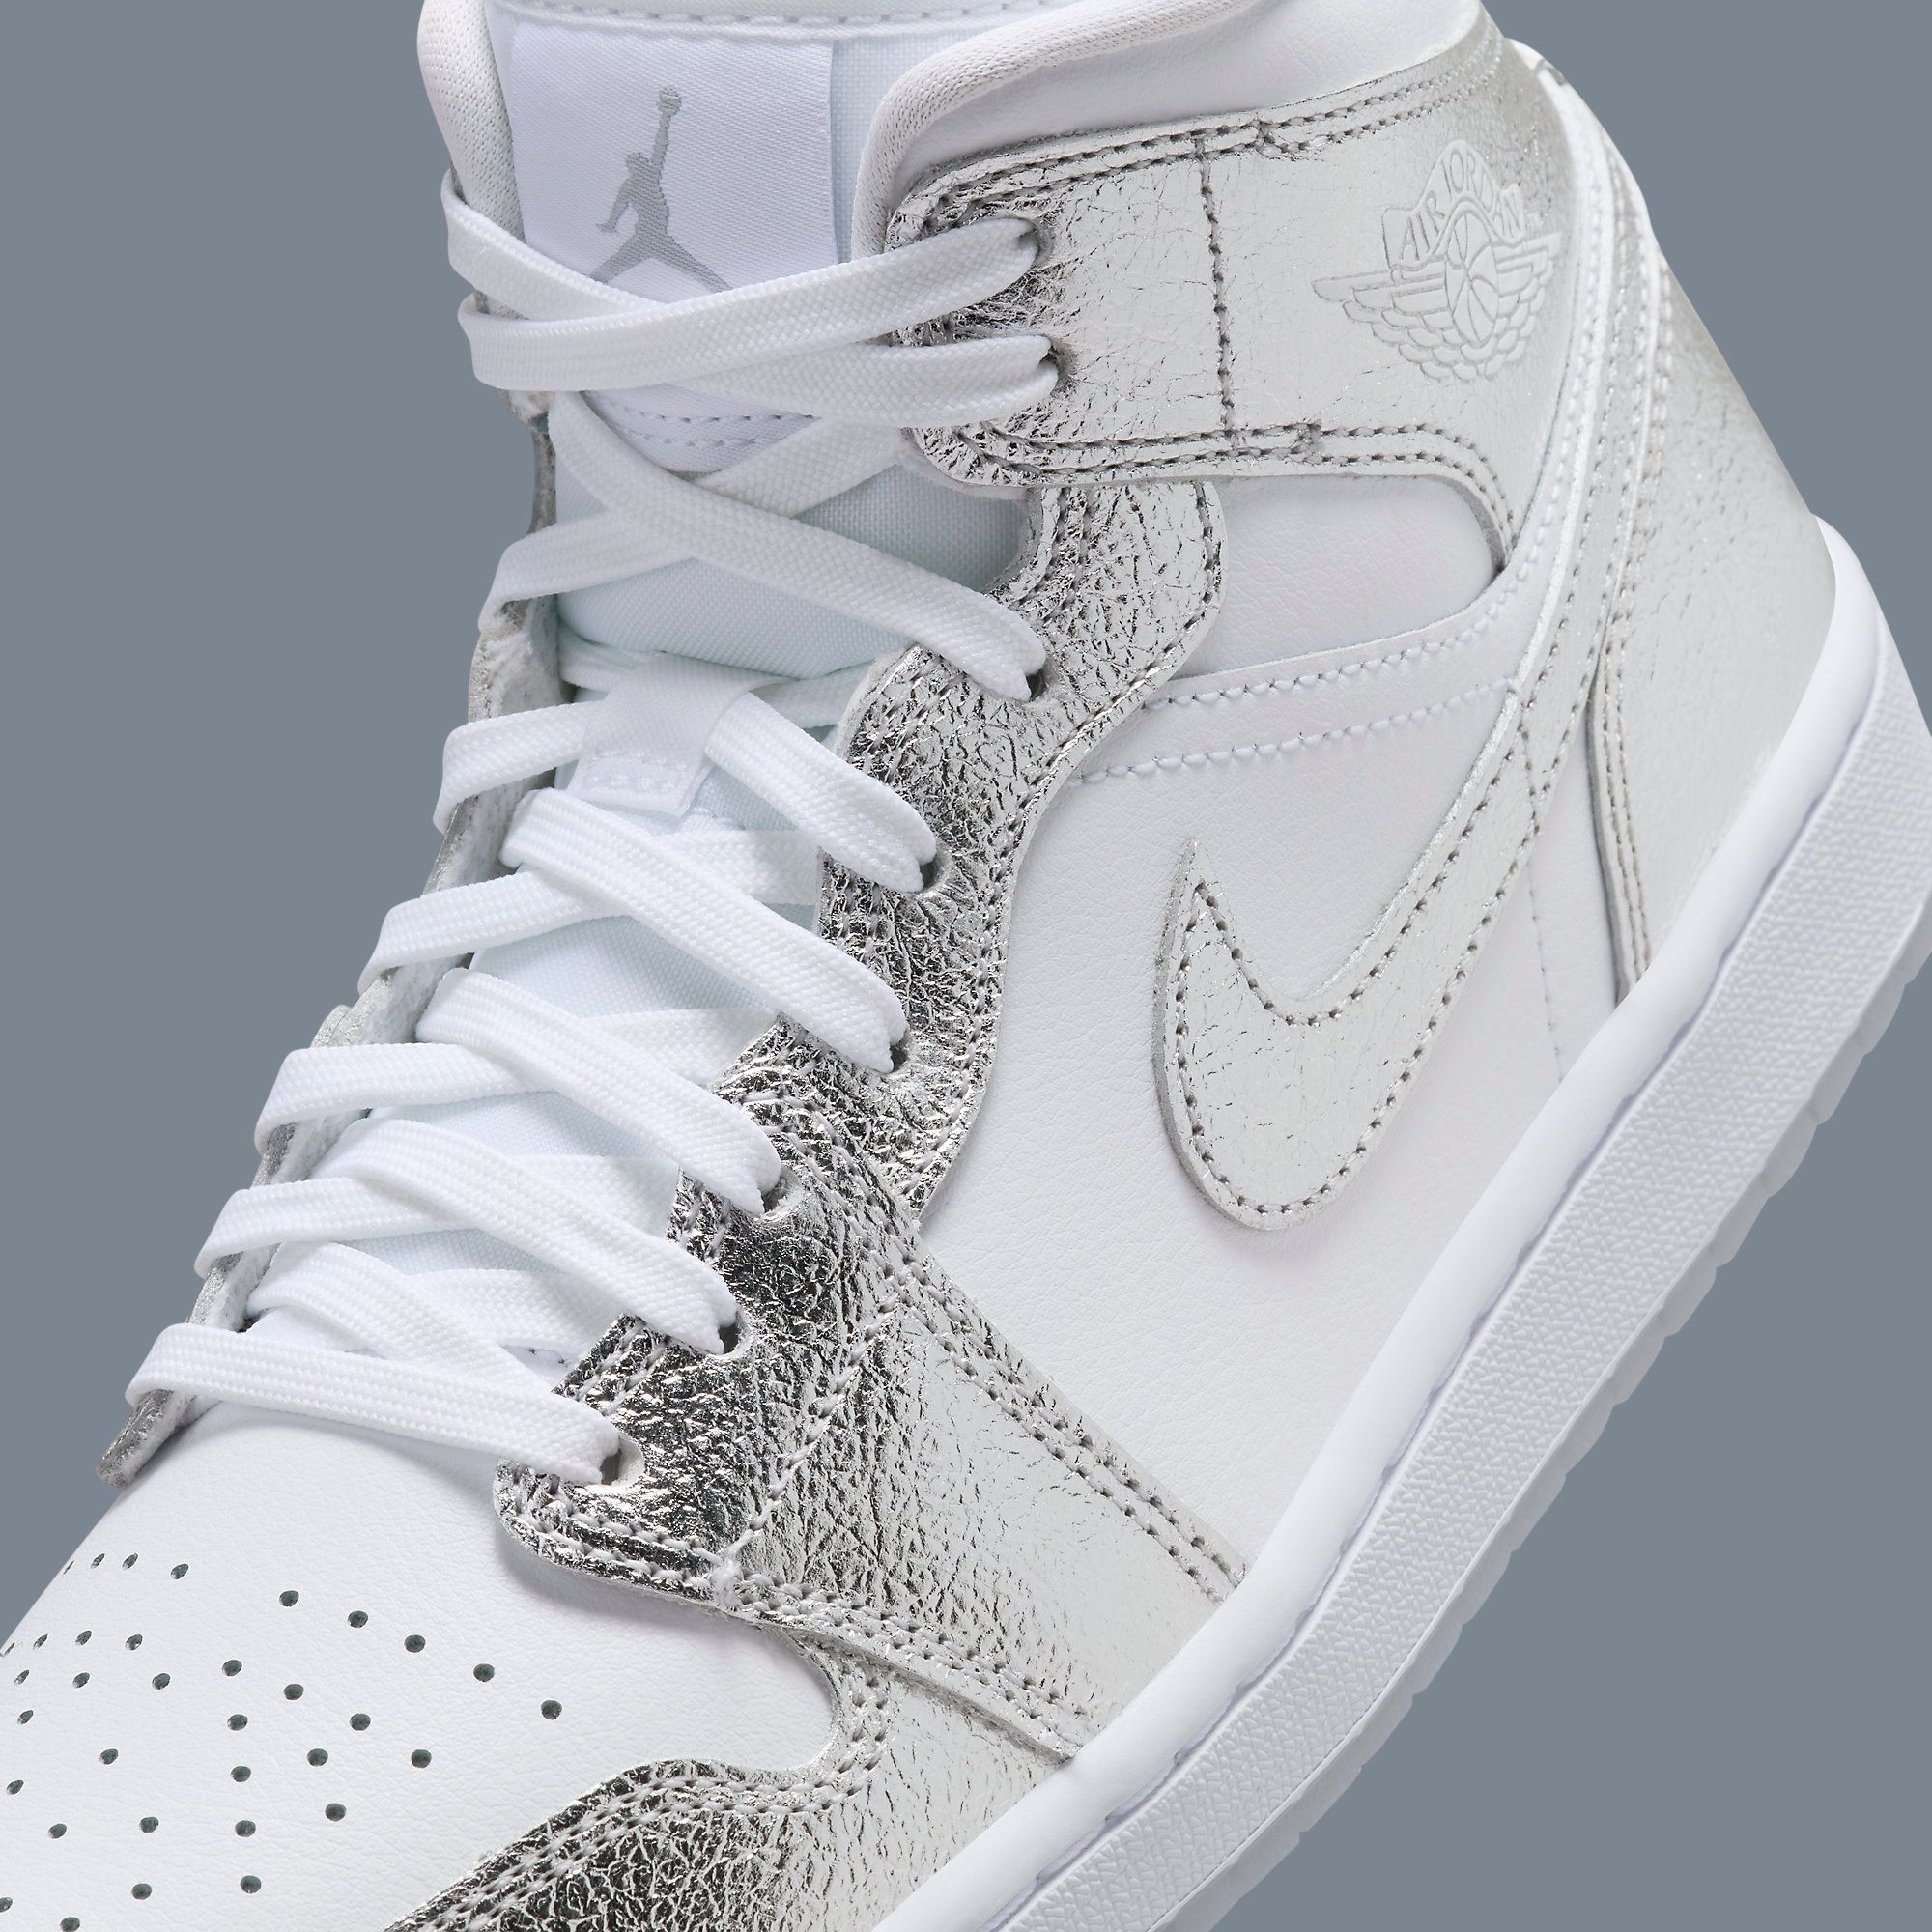 This Air Jordan 1 Mid Comes Covered in Crinkled Chrome | House of Heat°